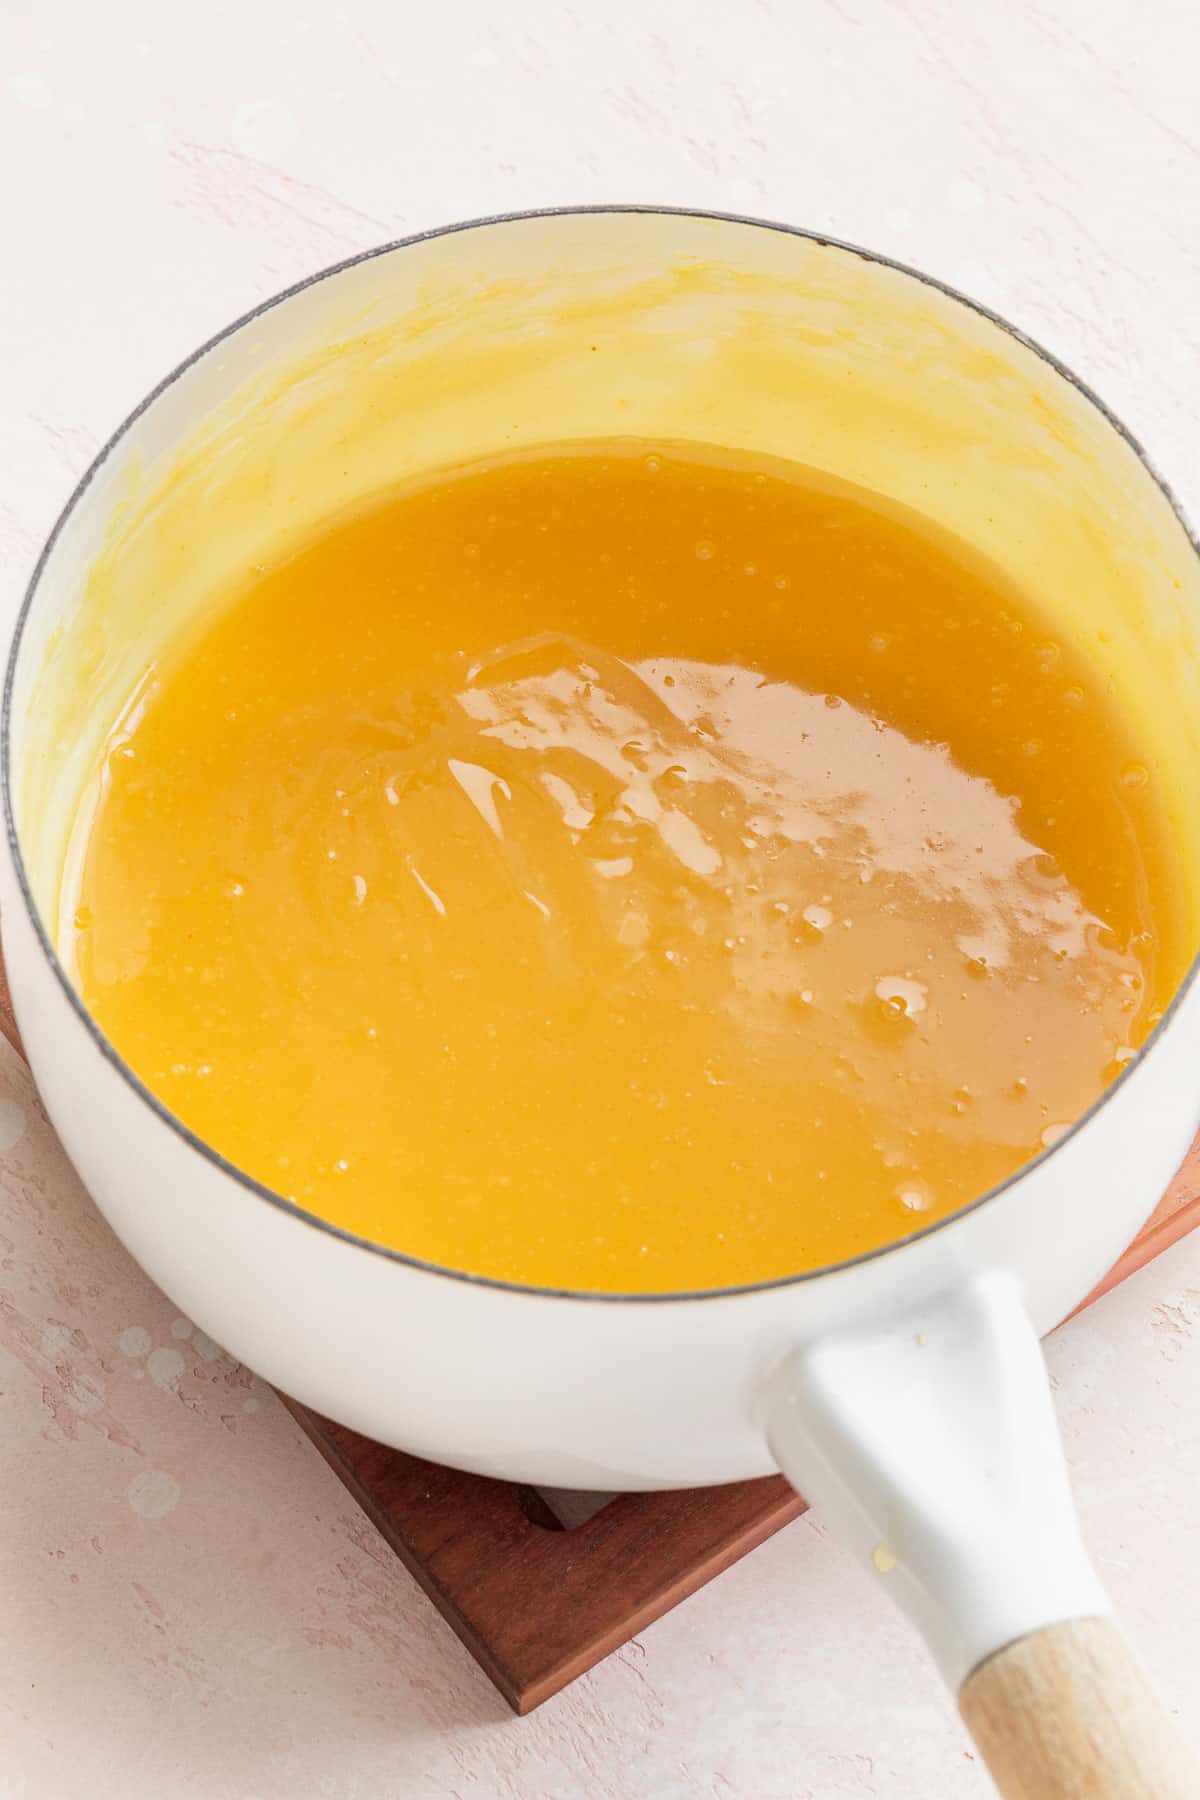 completed lemon curd in a sauce pan. it is bright yellow like the color of an egg yolk.